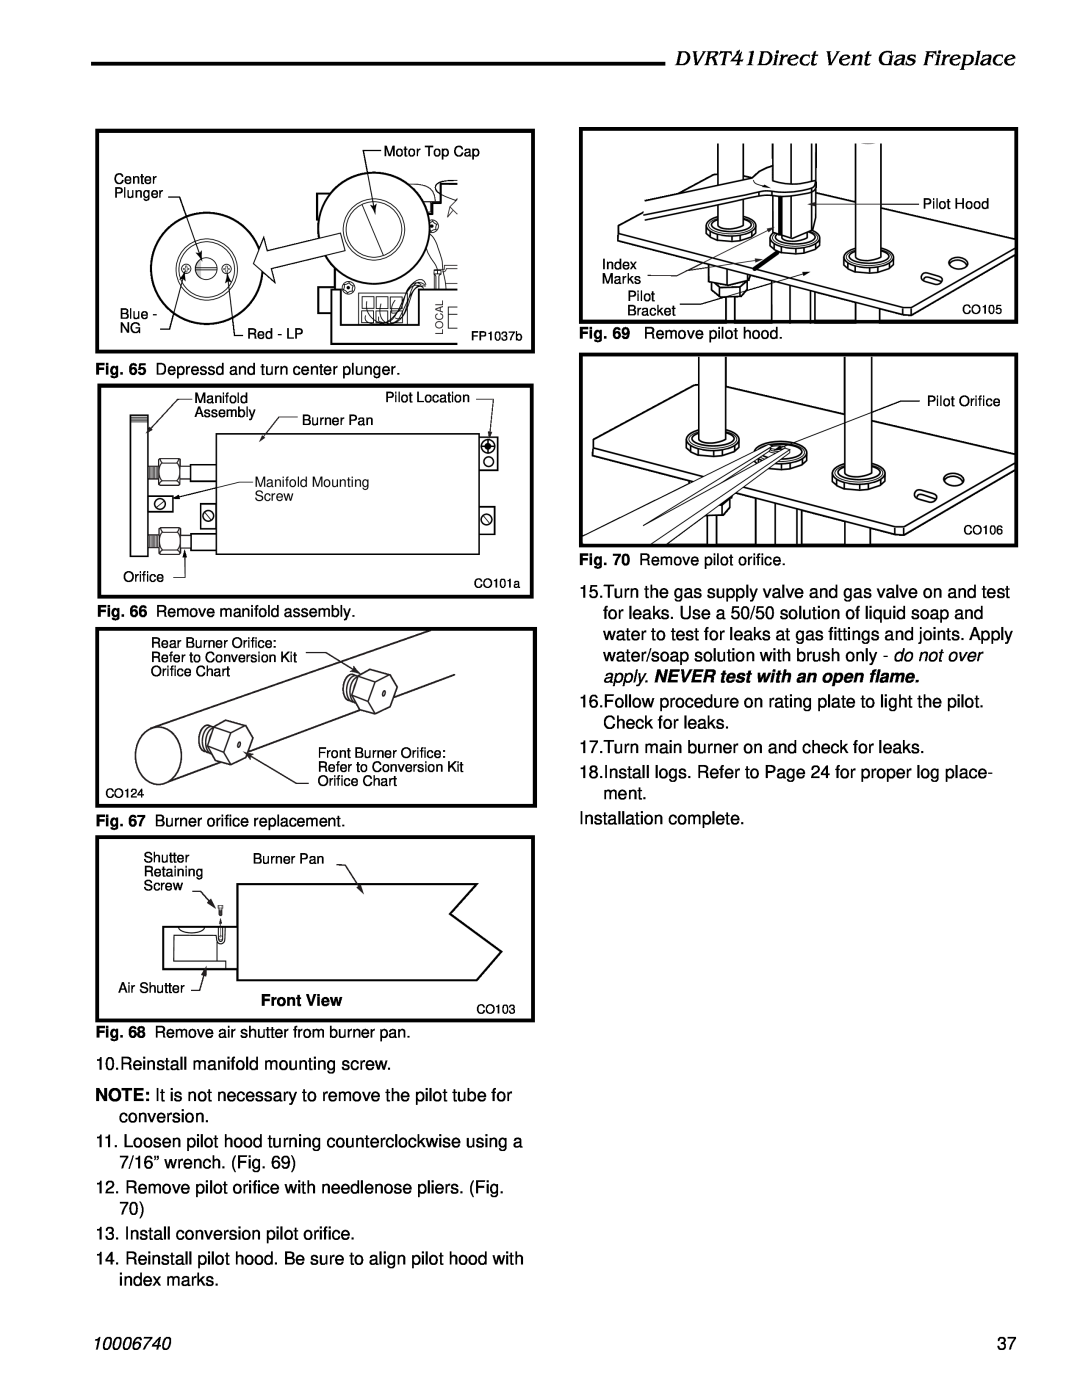 Vermont Casting manual DVRT41Direct Vent Gas Fireplace, Reinstall manifold mounting screw, 10006740 